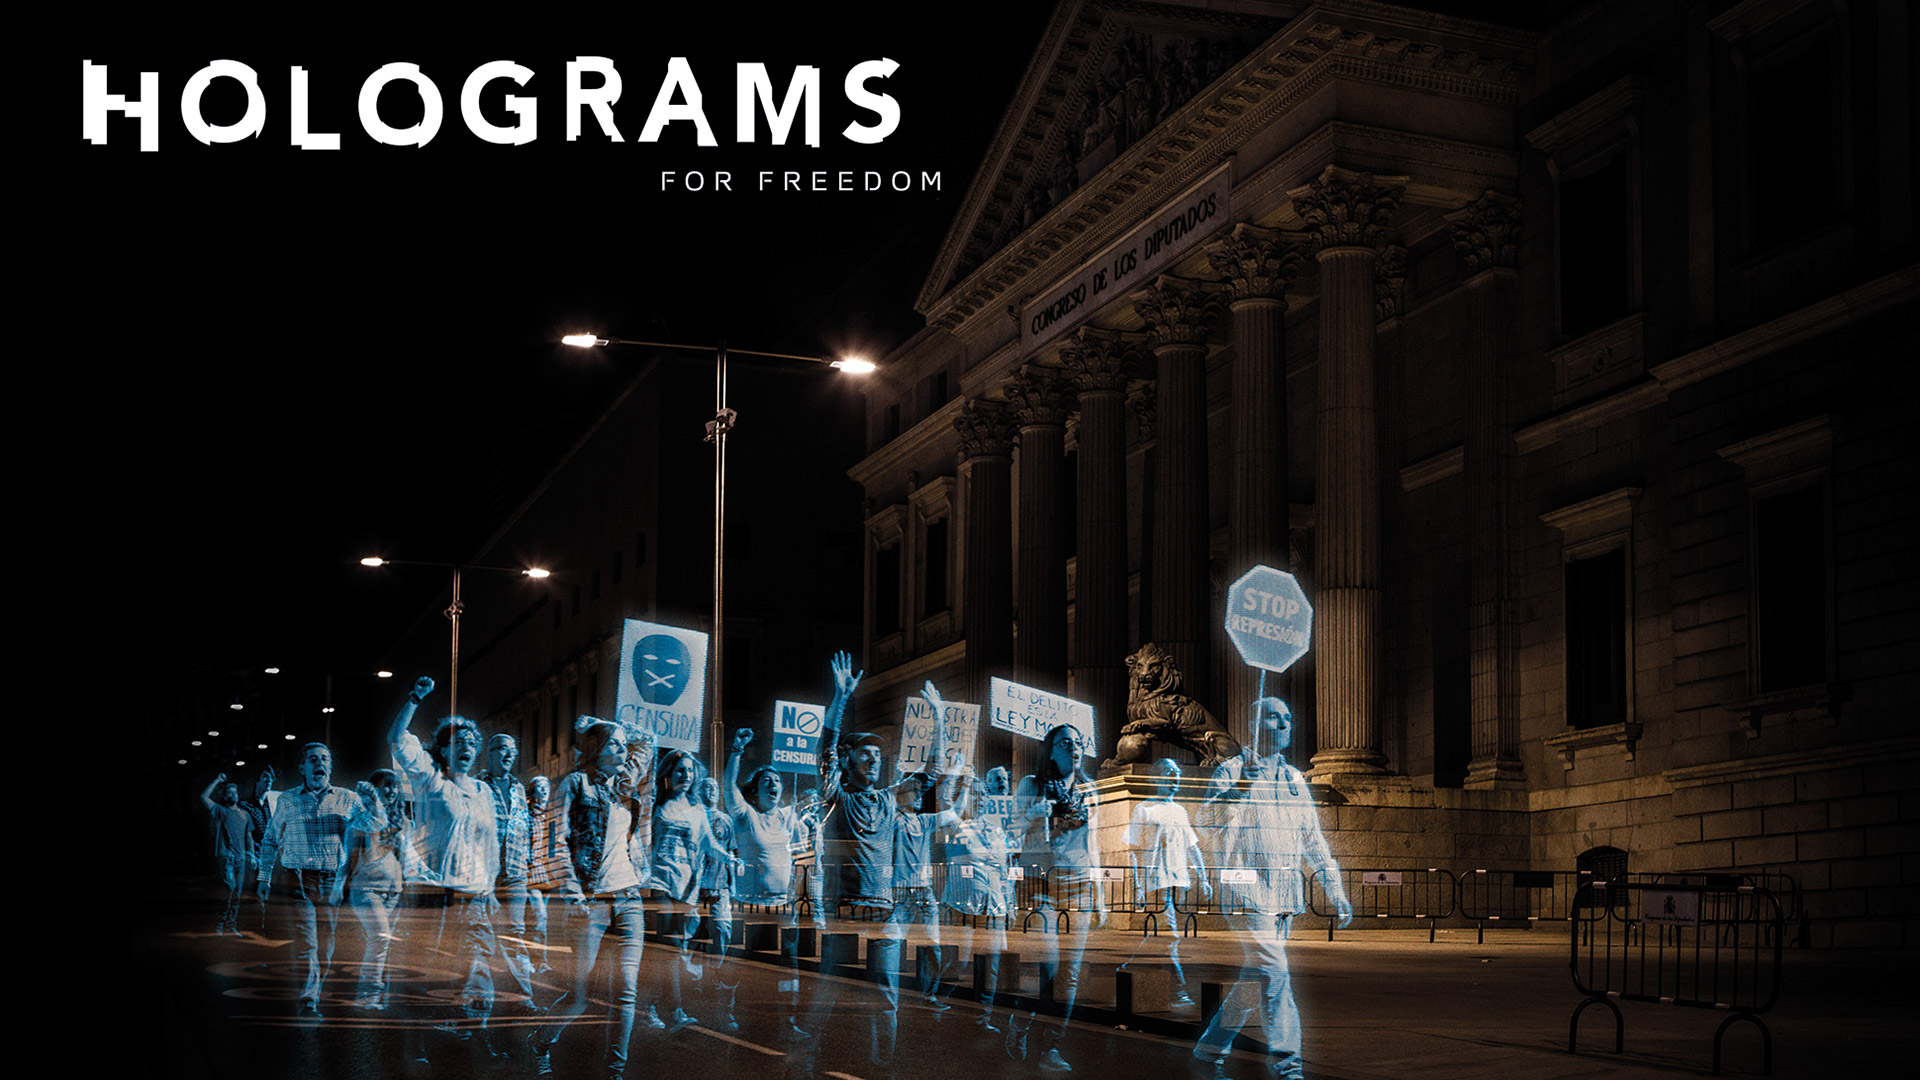 Holograms for Freedom